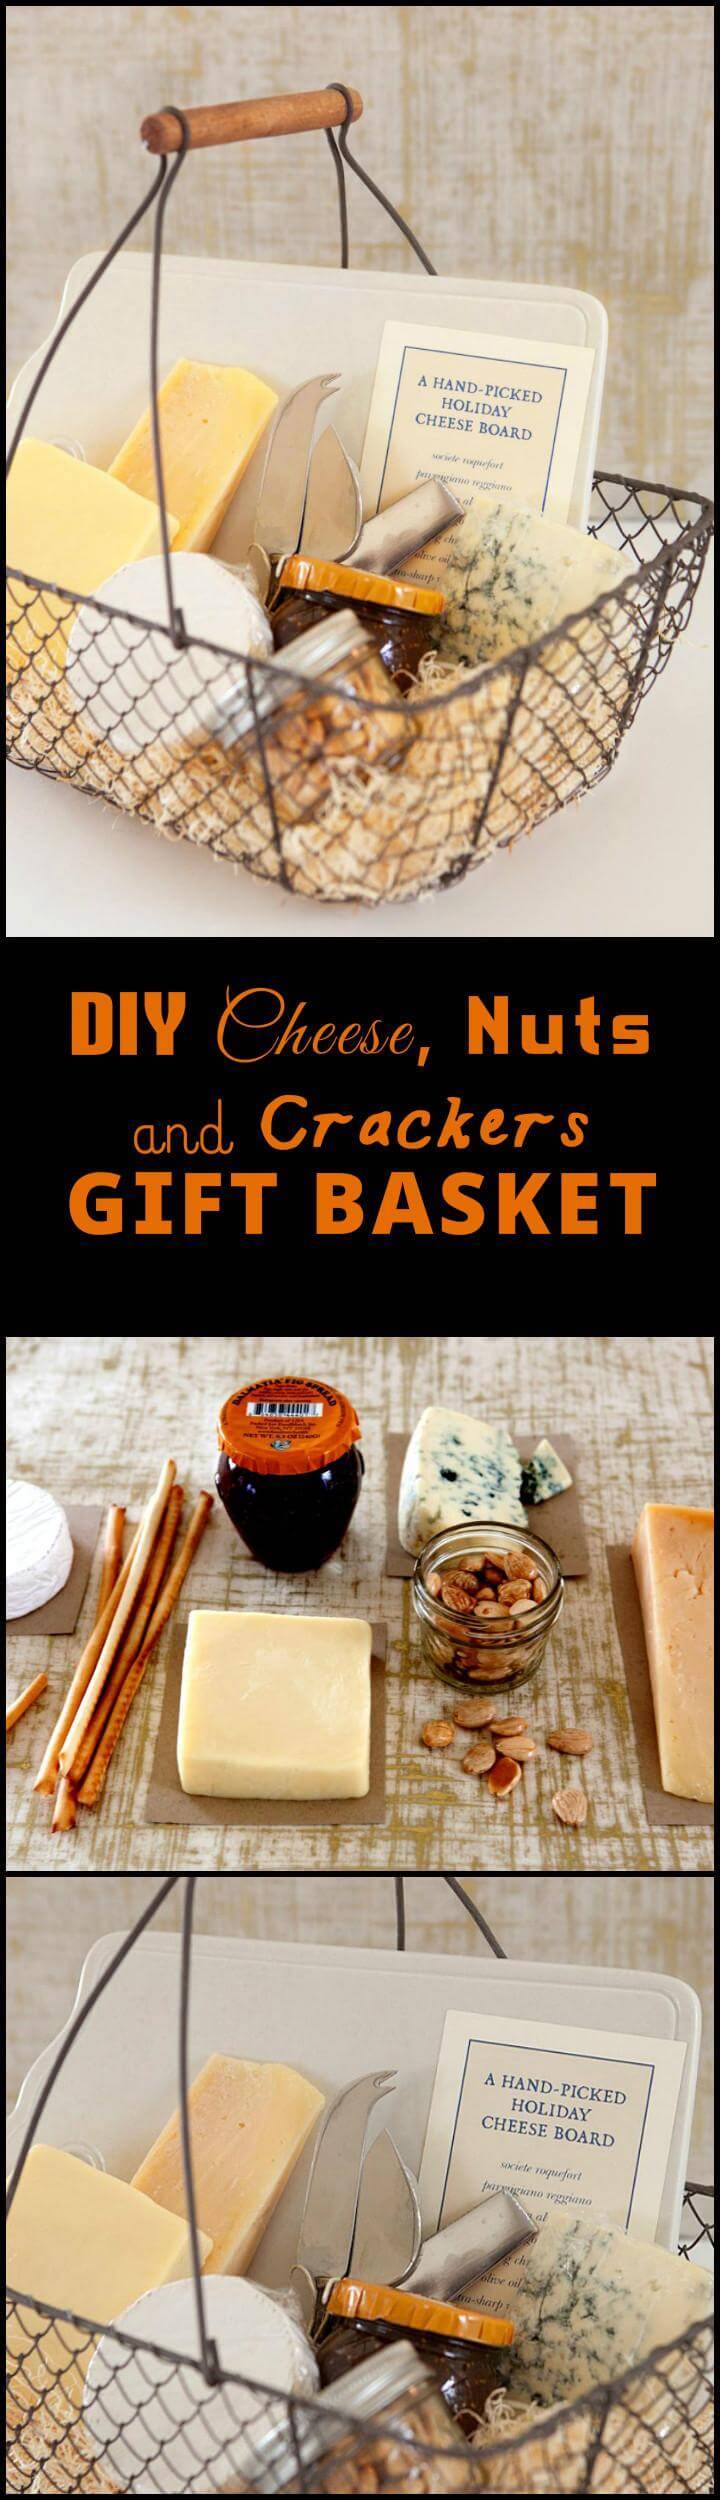 self-made nuts and cracker gift basket